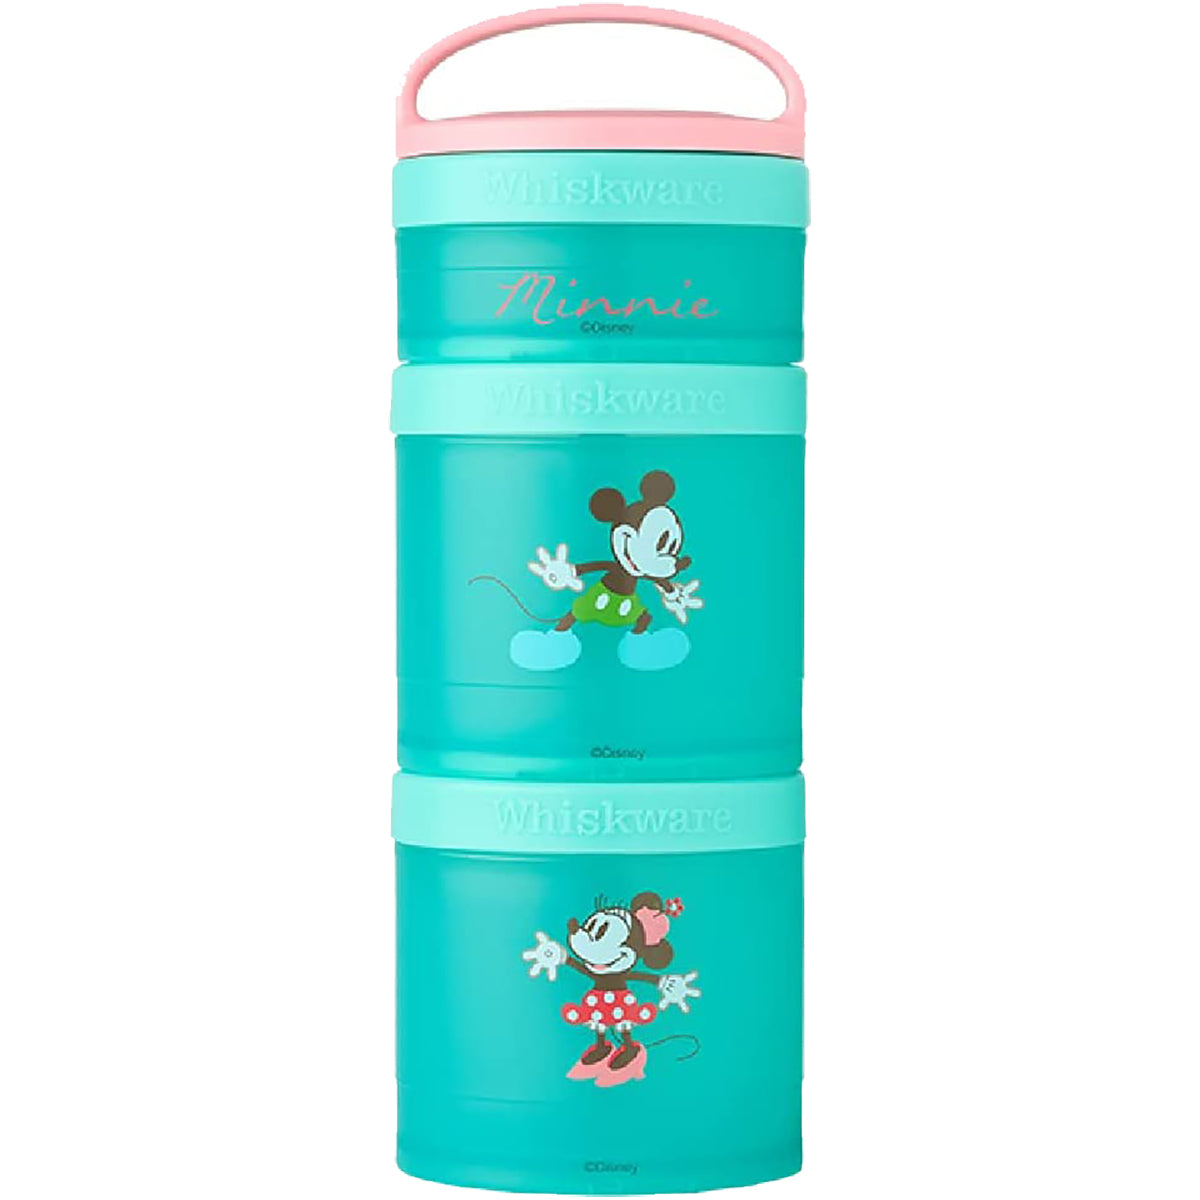 Whiskware Disney/Pixar Stackable Snack Pack Containers Whiskware